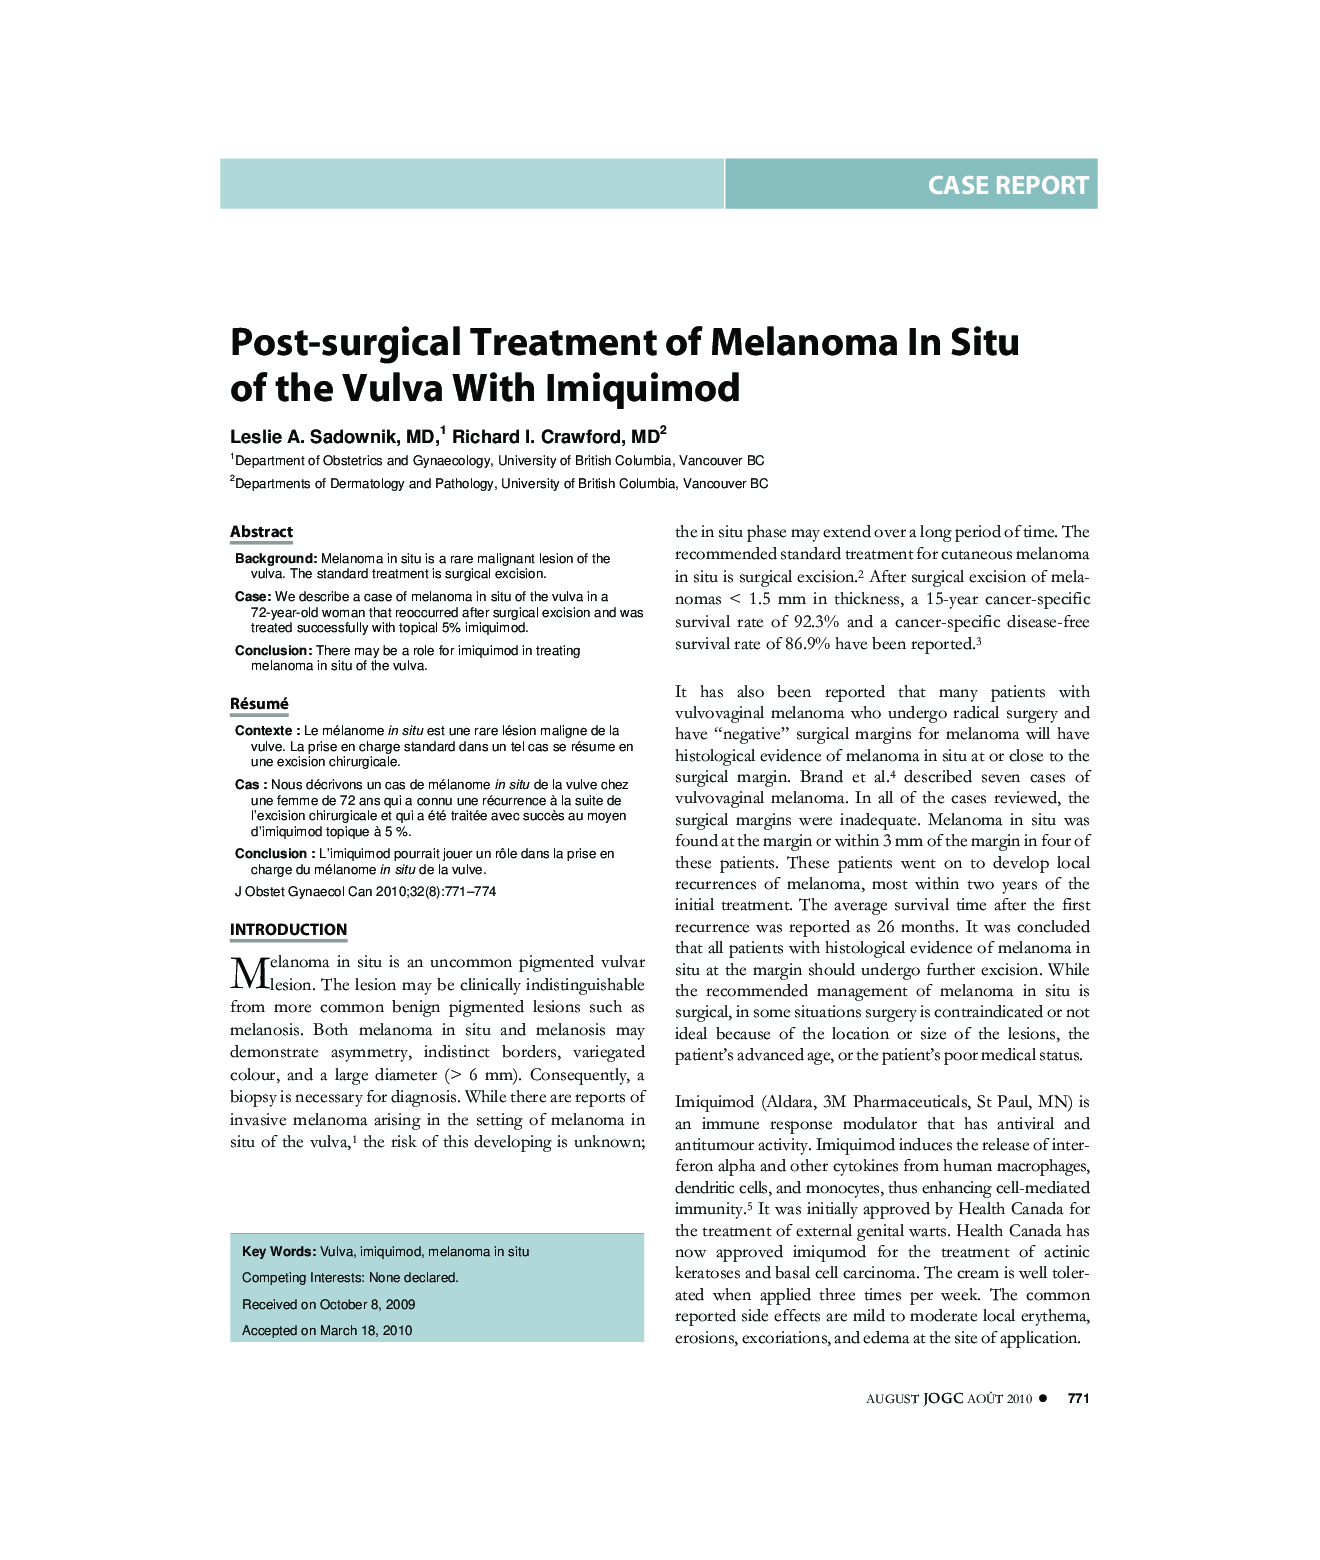 Post-surgical Treatment of Melanoma In Situ of the Vulva With Imiquimod